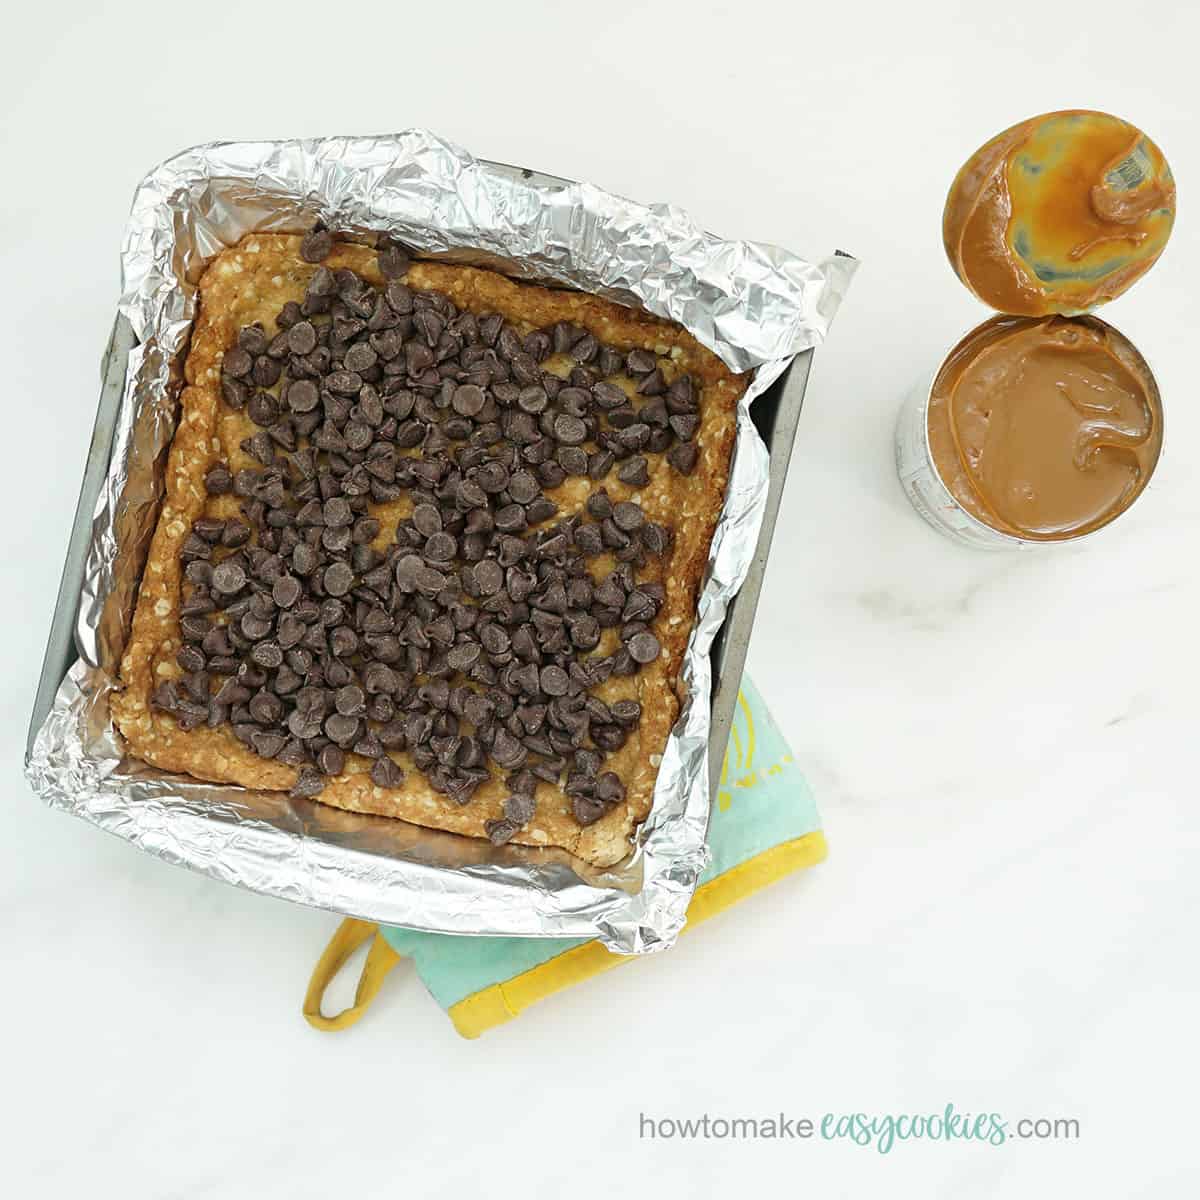 topping oatmeal crust with caramel and chocolate